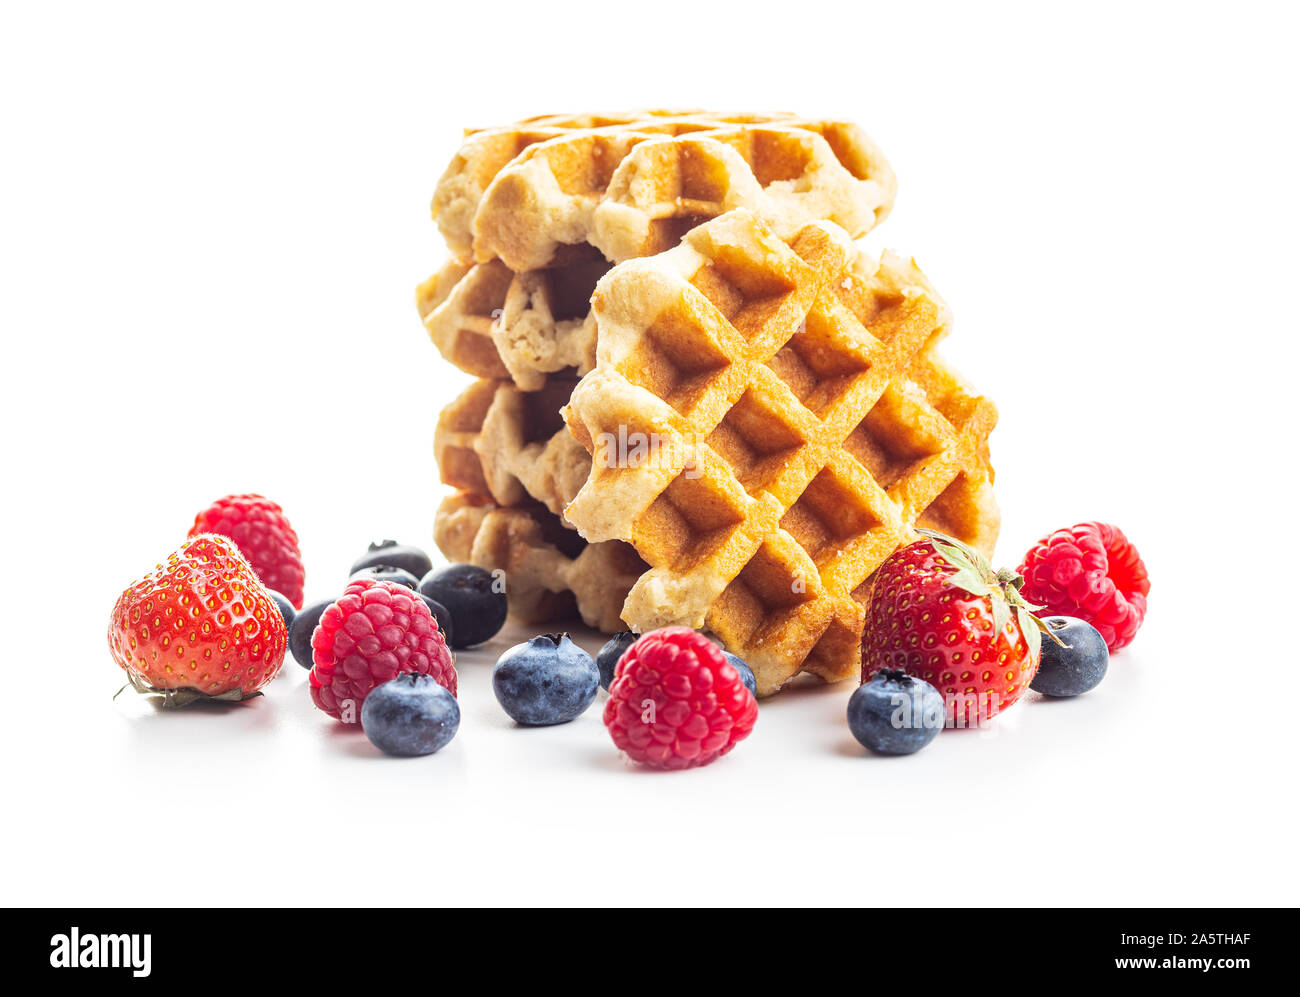 Waffles with blueberries and raspberries isolated on white background. Stock Photo